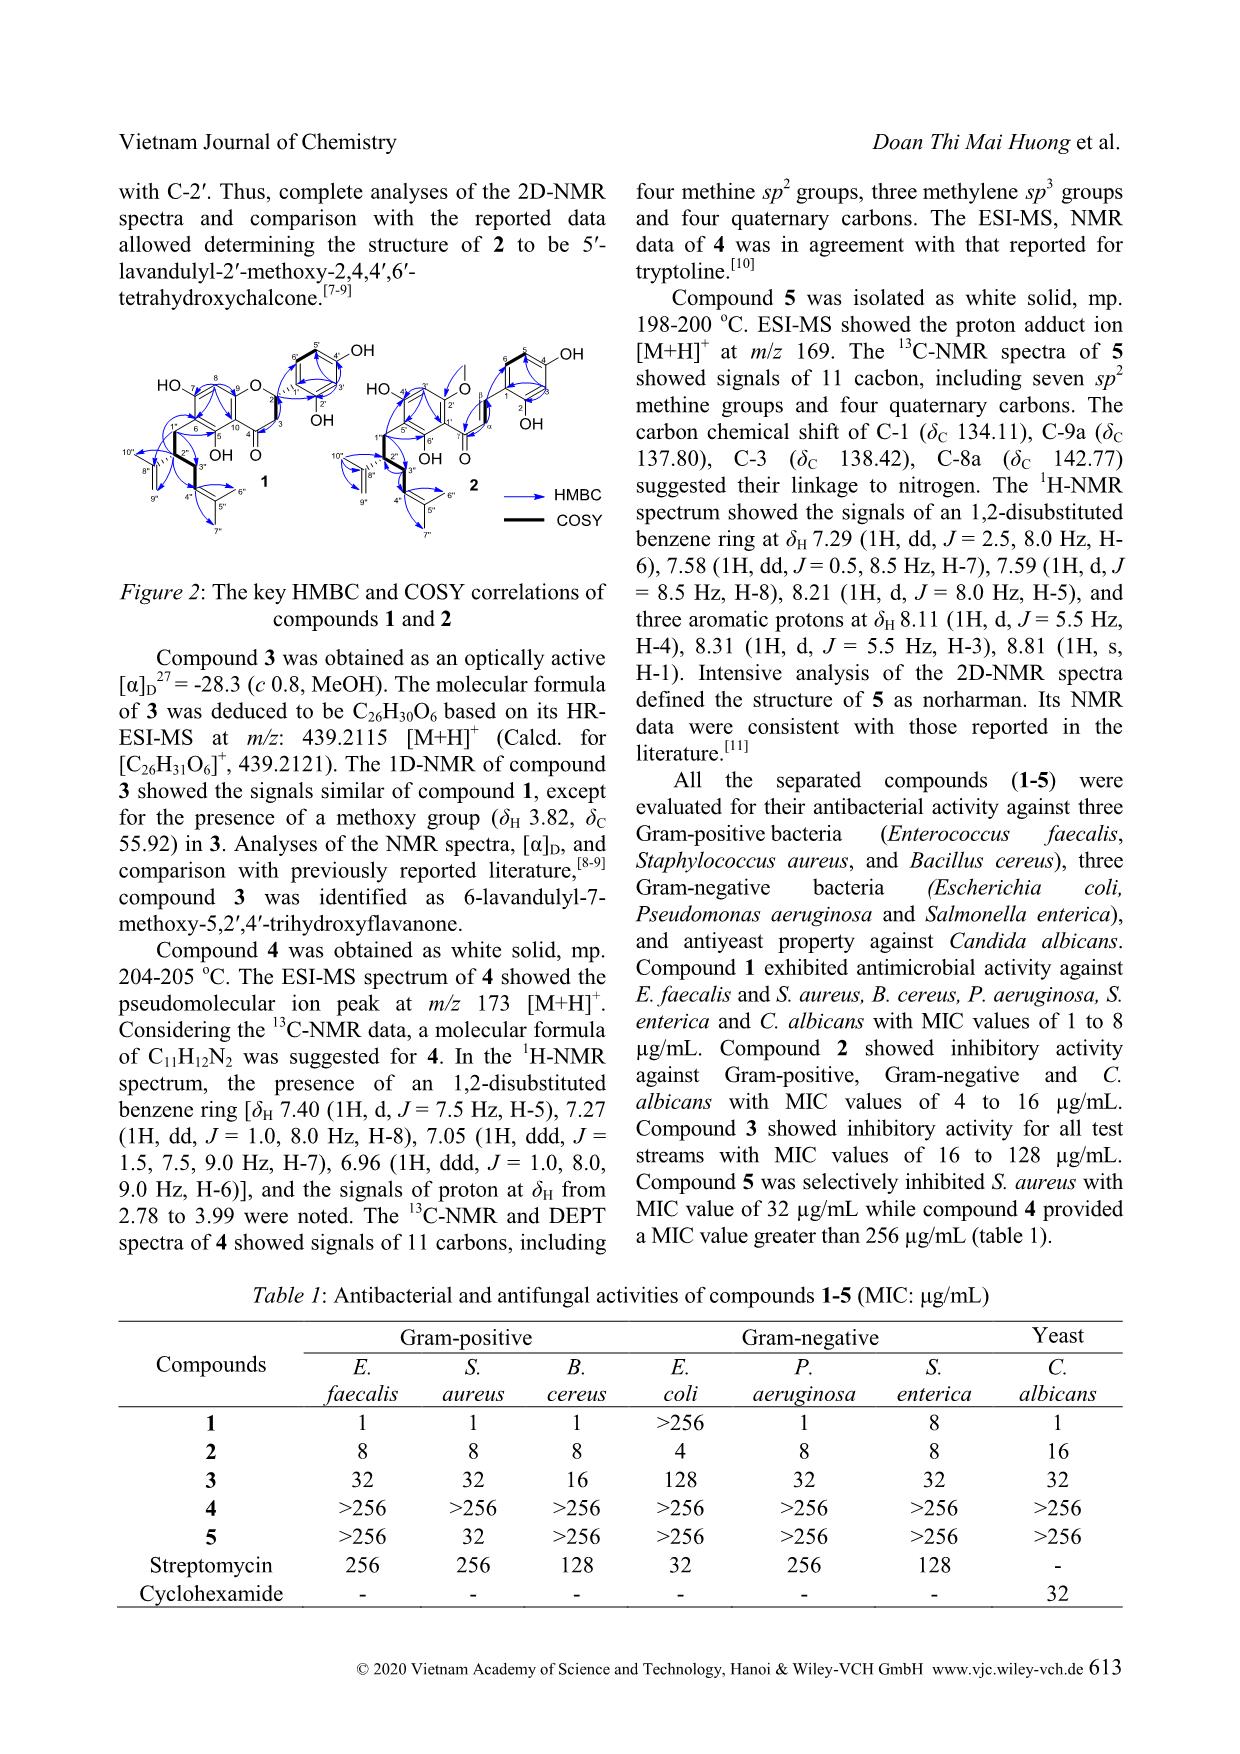 Flavonoids and Alkaloids from Marine-Derived Actinomycete Streptomyces sp. C011 trang 4